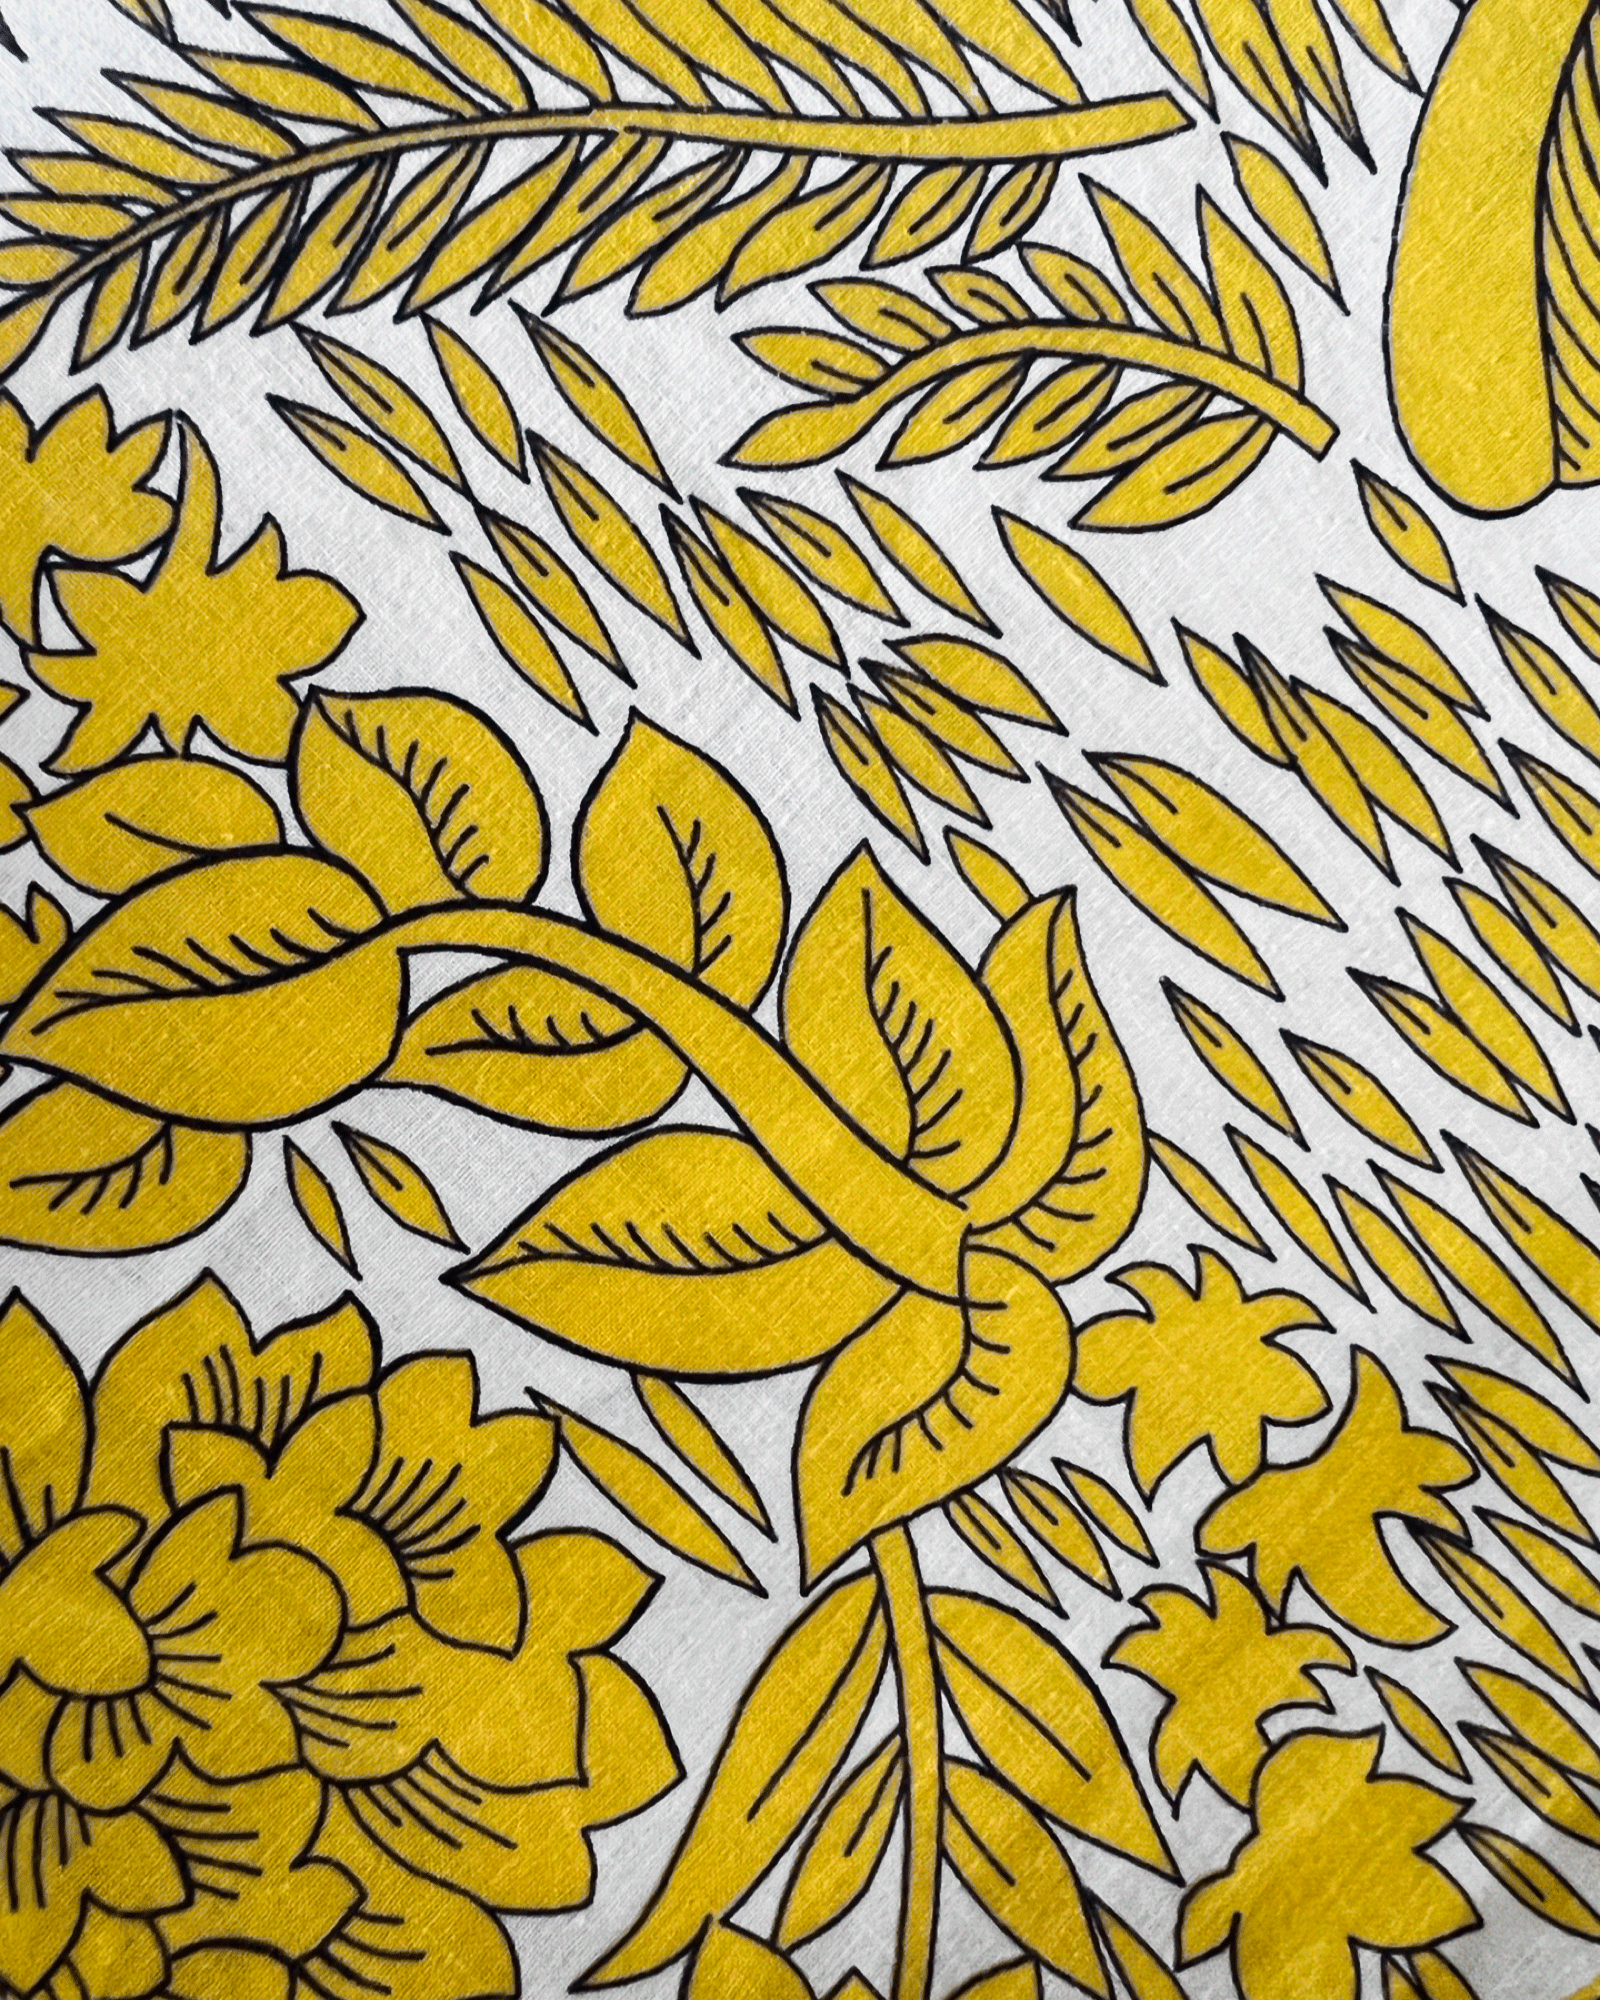 1950s Bright Yellow Tropical Cotton